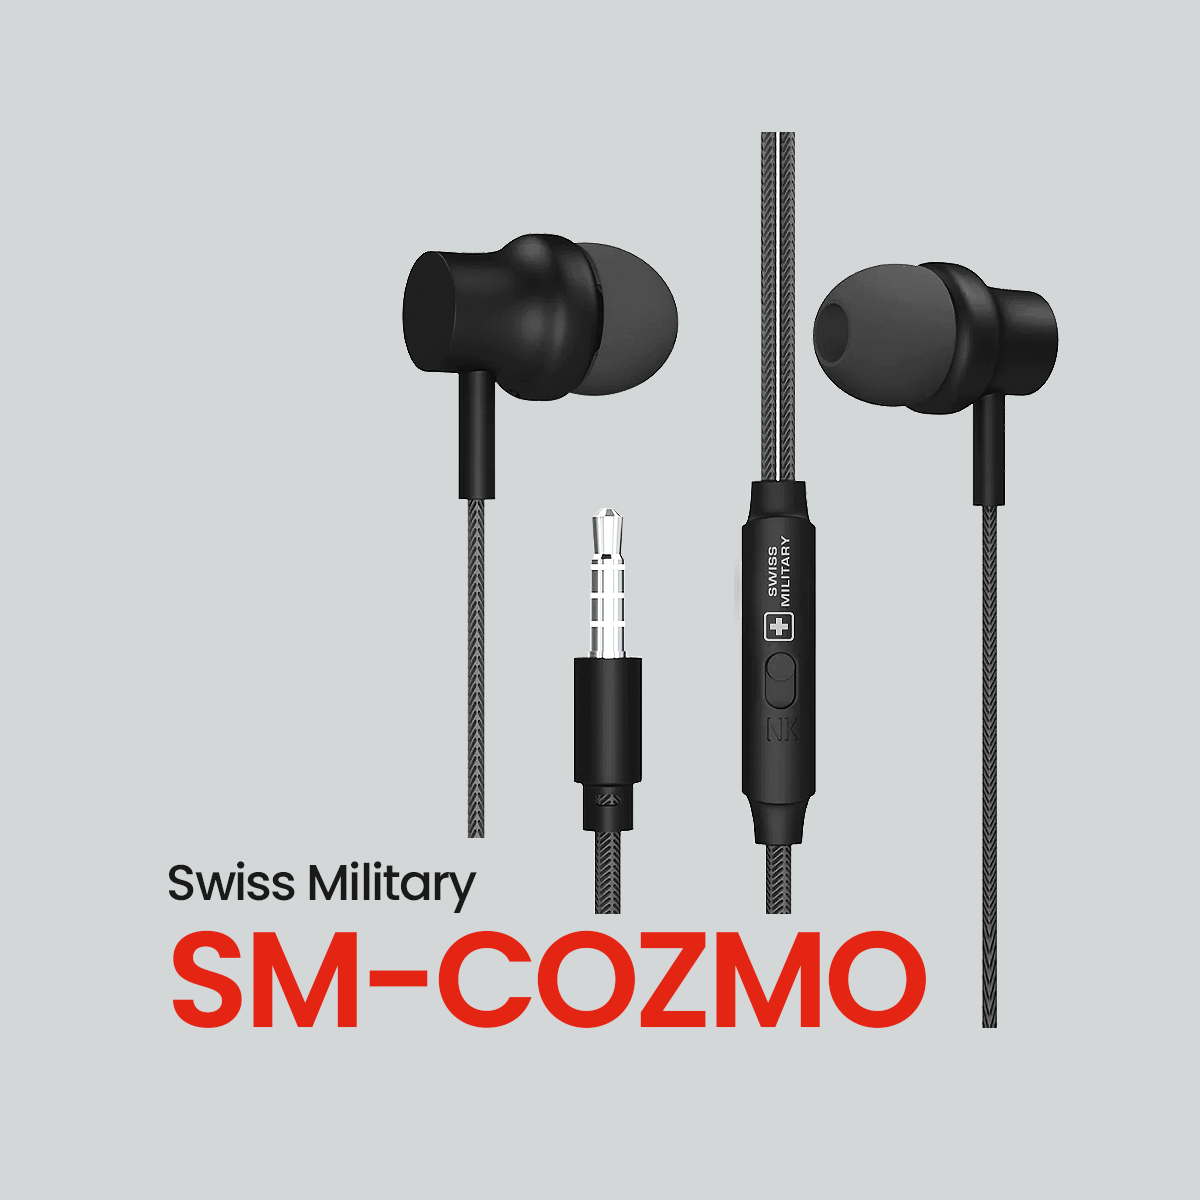 SM-COZMO - THE ULTIMATE EARPHONES FOR MUSIC AND MOVIES, WITH ELEGANT DESIGN AND POWERFUL AUDIO.